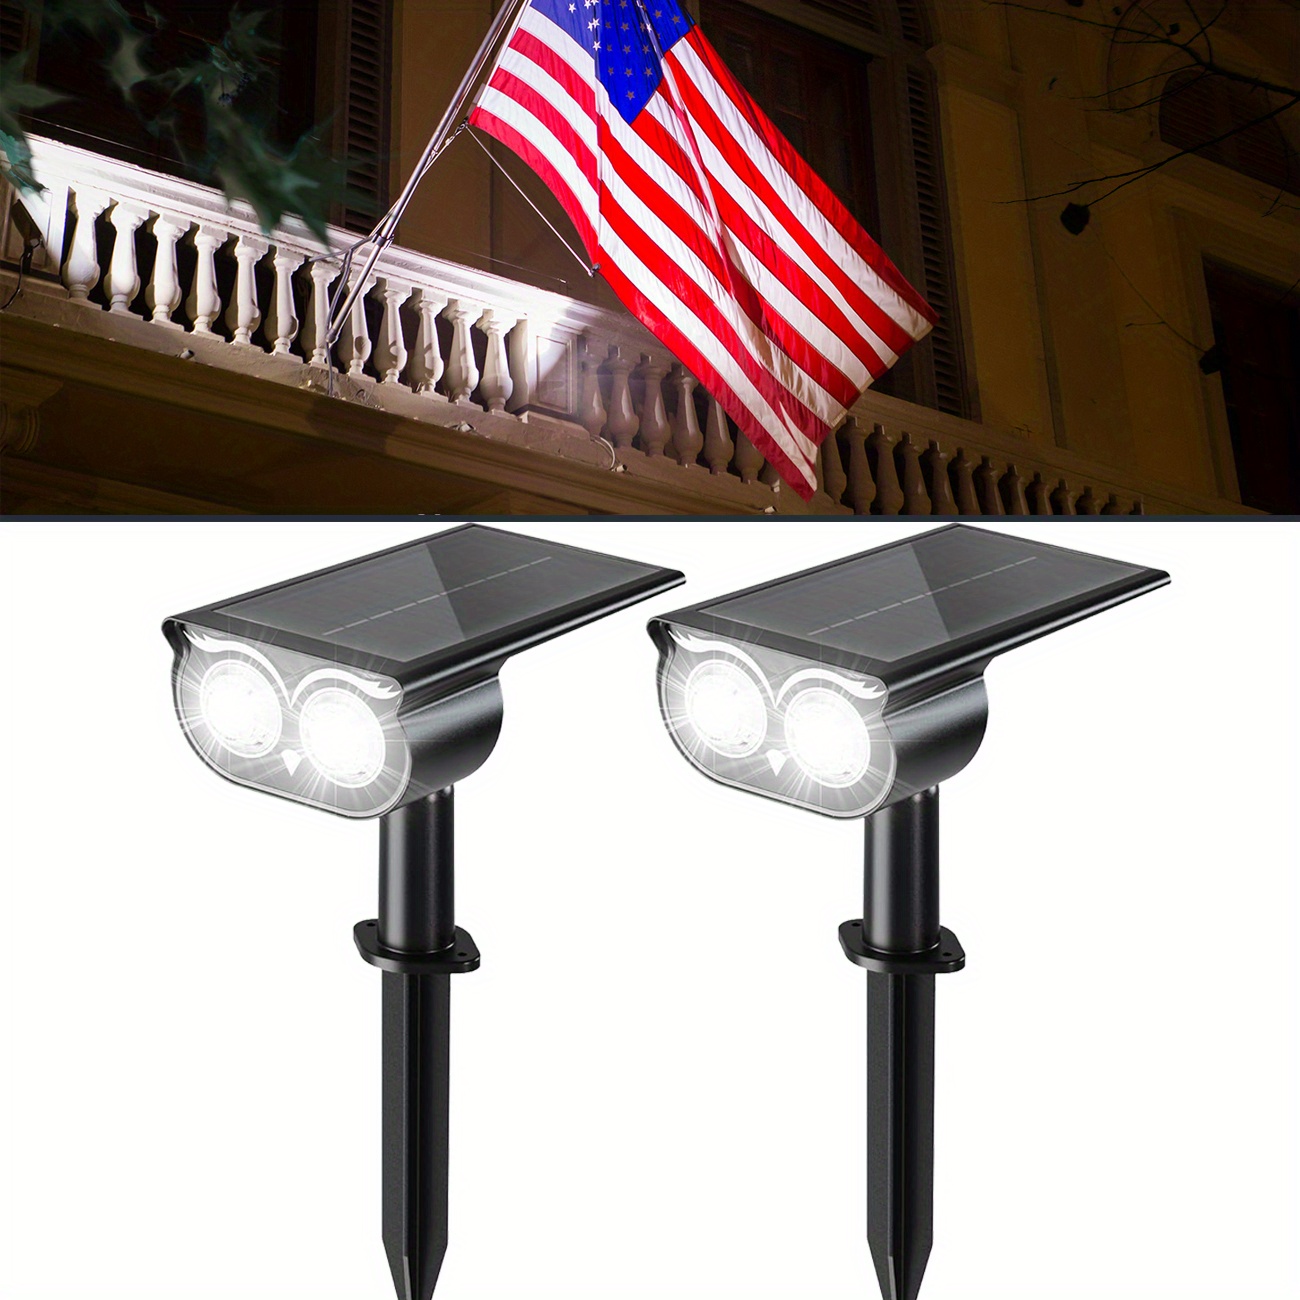 

Jackyled Solar Spot Lights, Owl Face, 3 Modes Bright Led Solar Lights For Outside, 2 Pack Landscape Lighting Waterproof For Garden, Yard, Driveway, Pathway, Walkway, Cool White Light